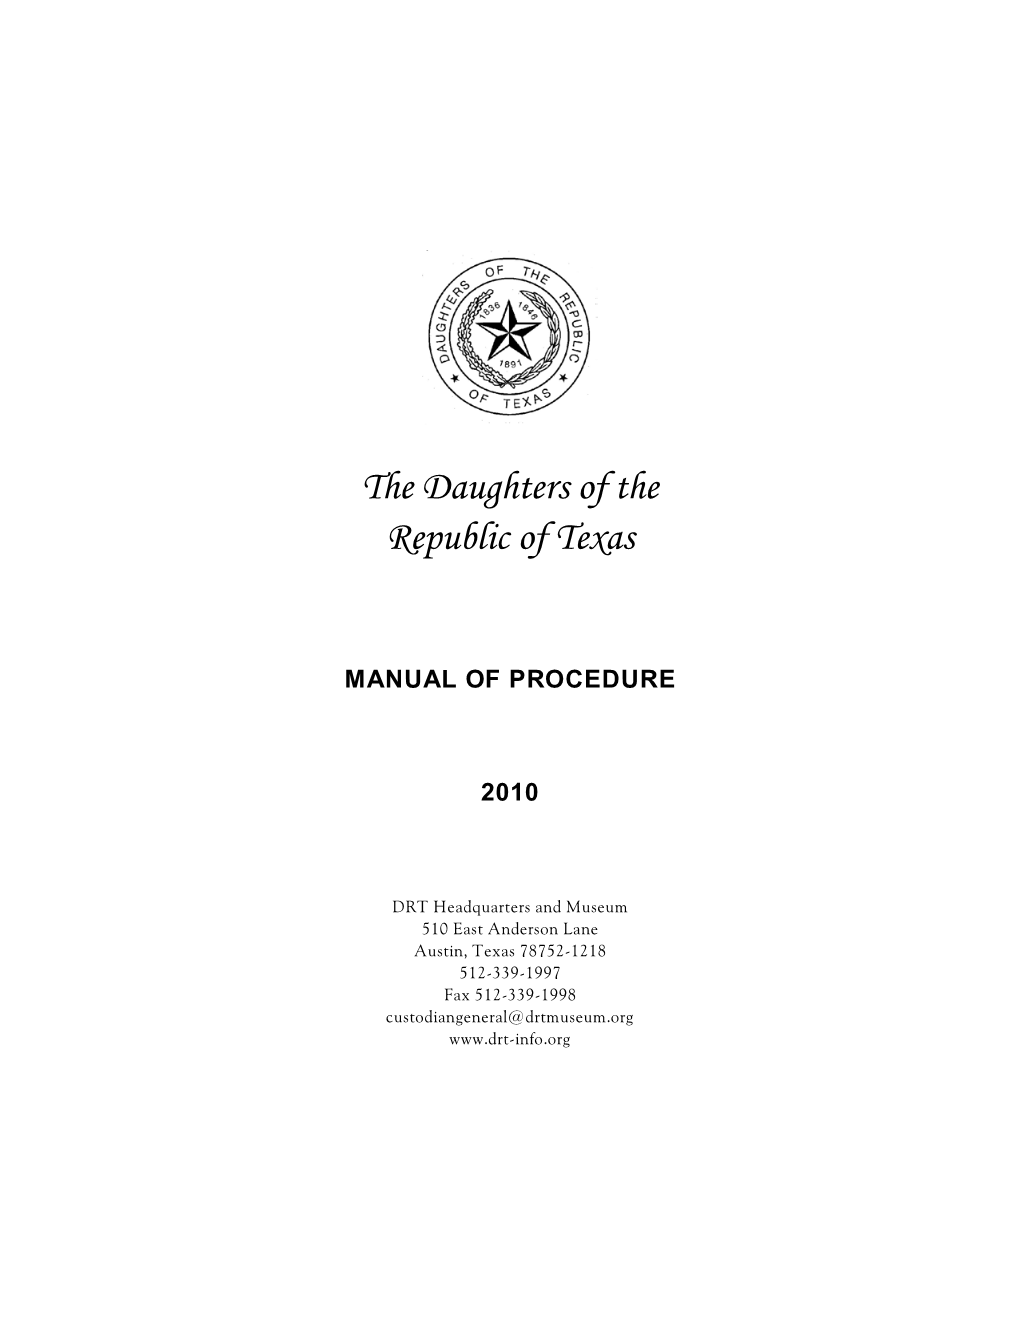 The Daughters of the Republic of Texas MANUAL of PROCEDURE